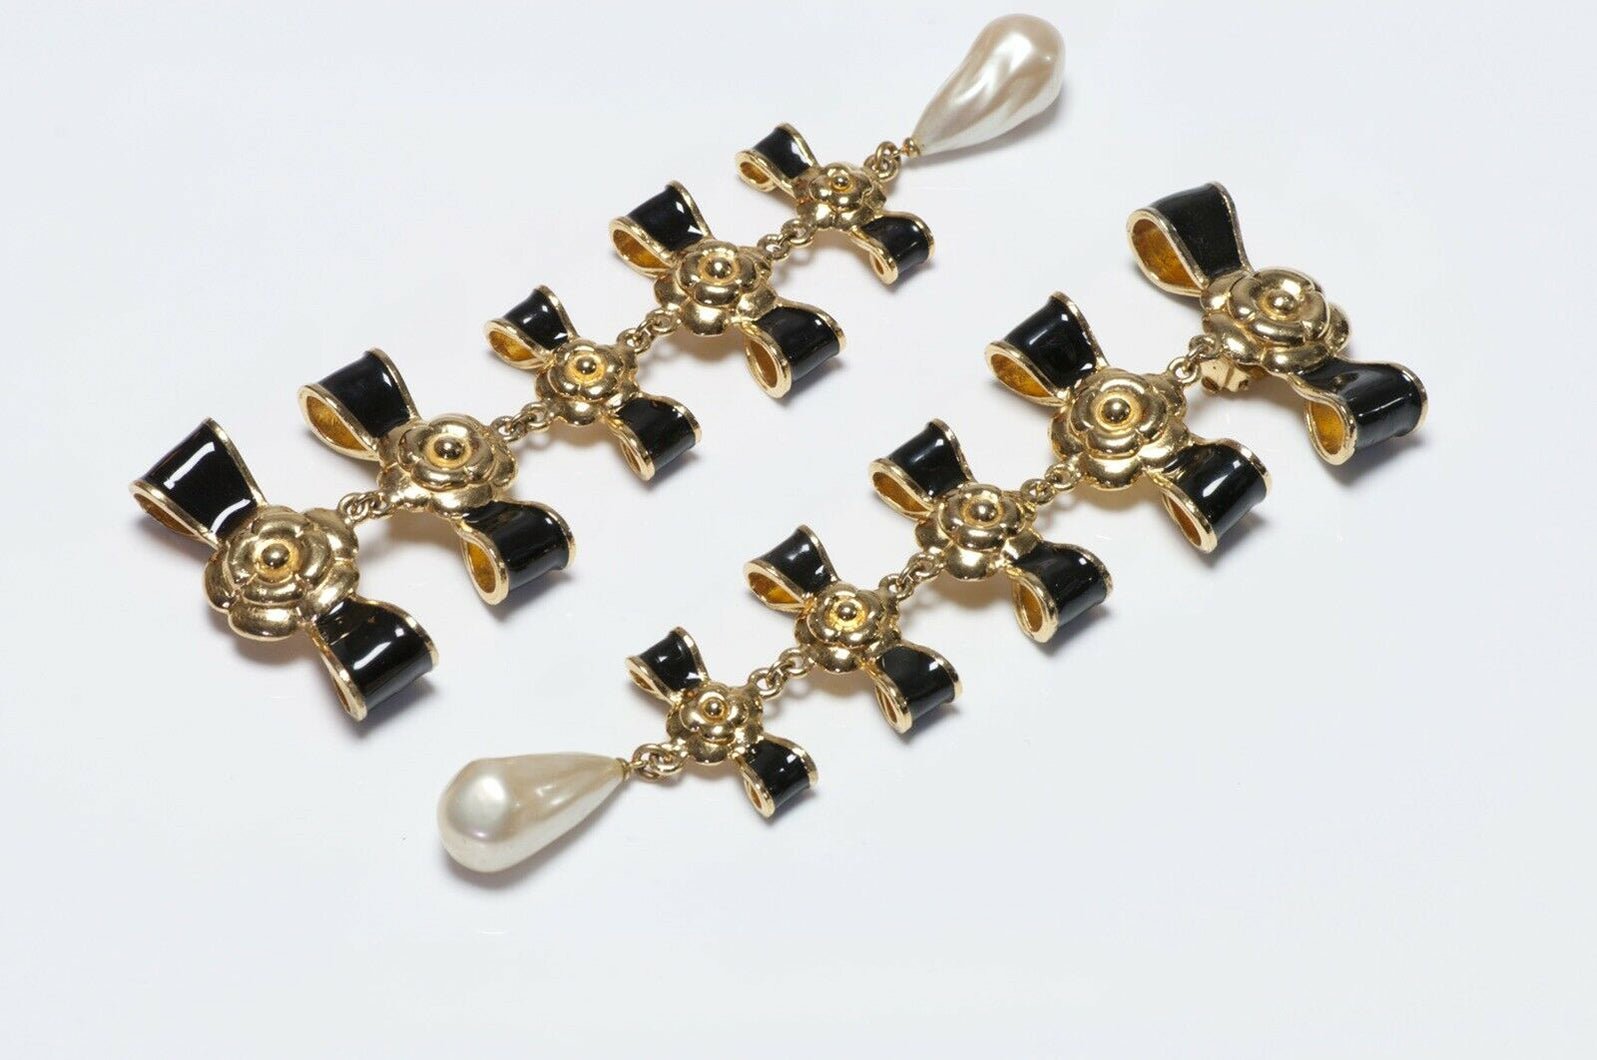 CHANEL Paris Extra Long Black Enamel Bows Camellia Pearl Earrings - DSF Antique Jewelry